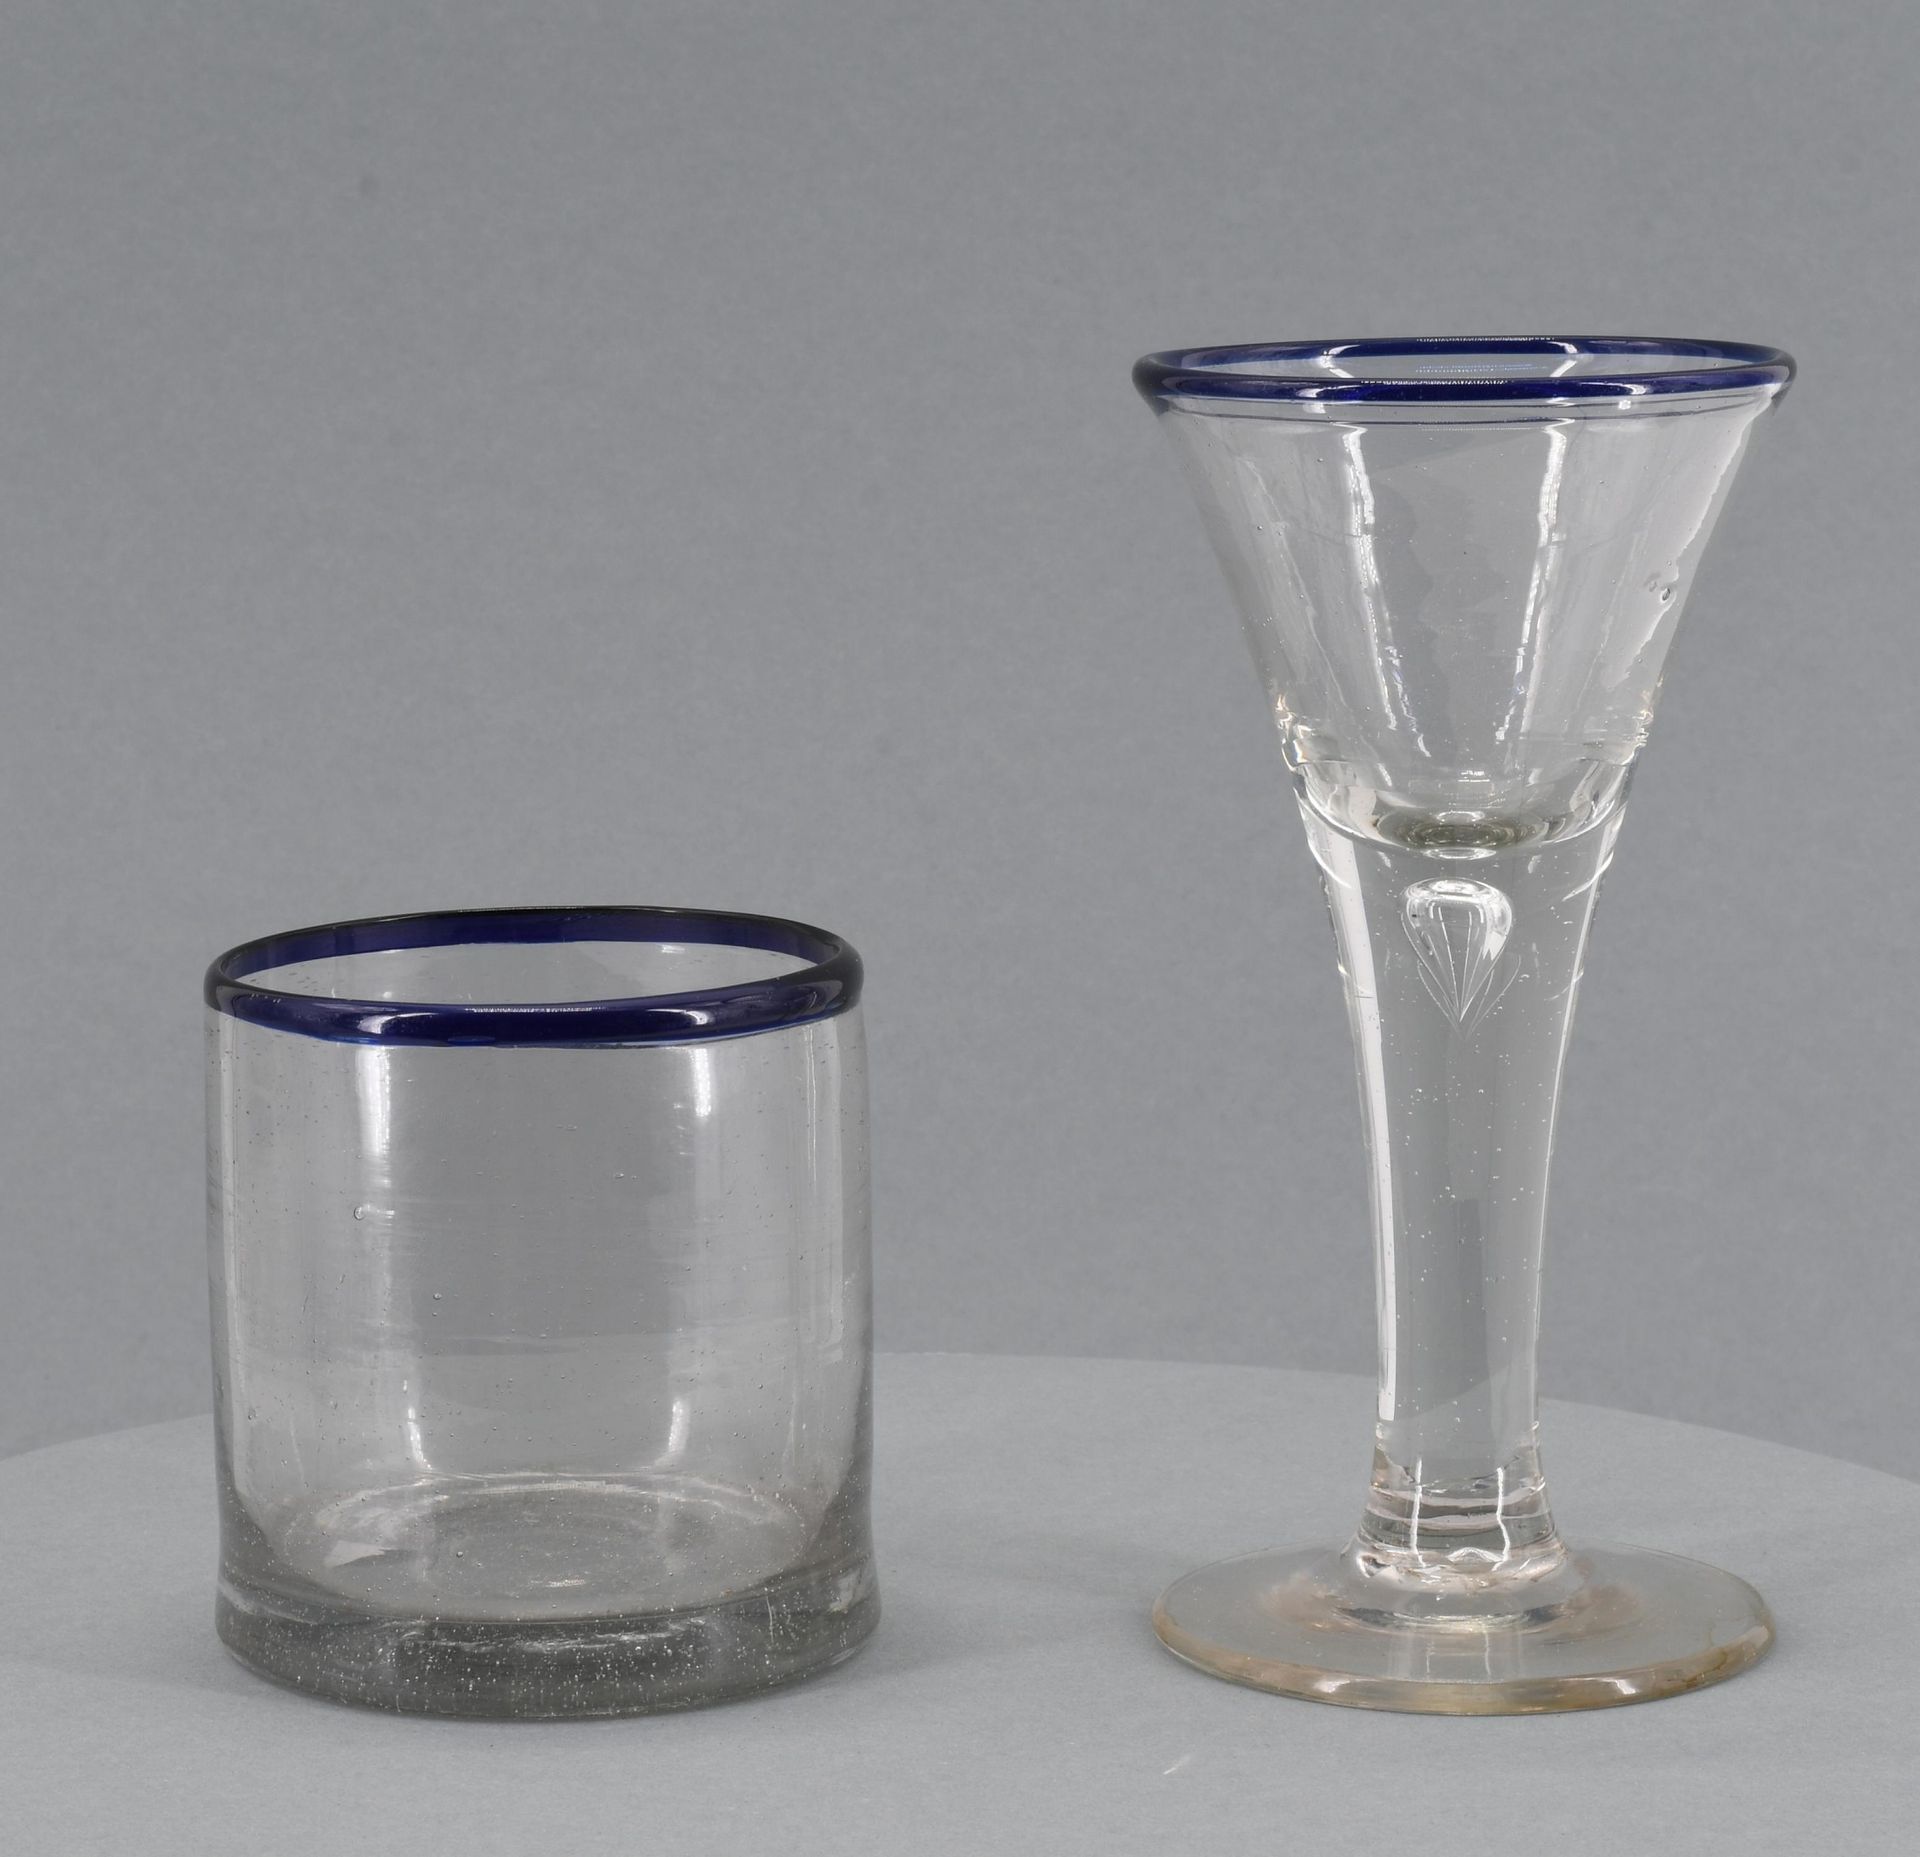 Two glasses with blue rim